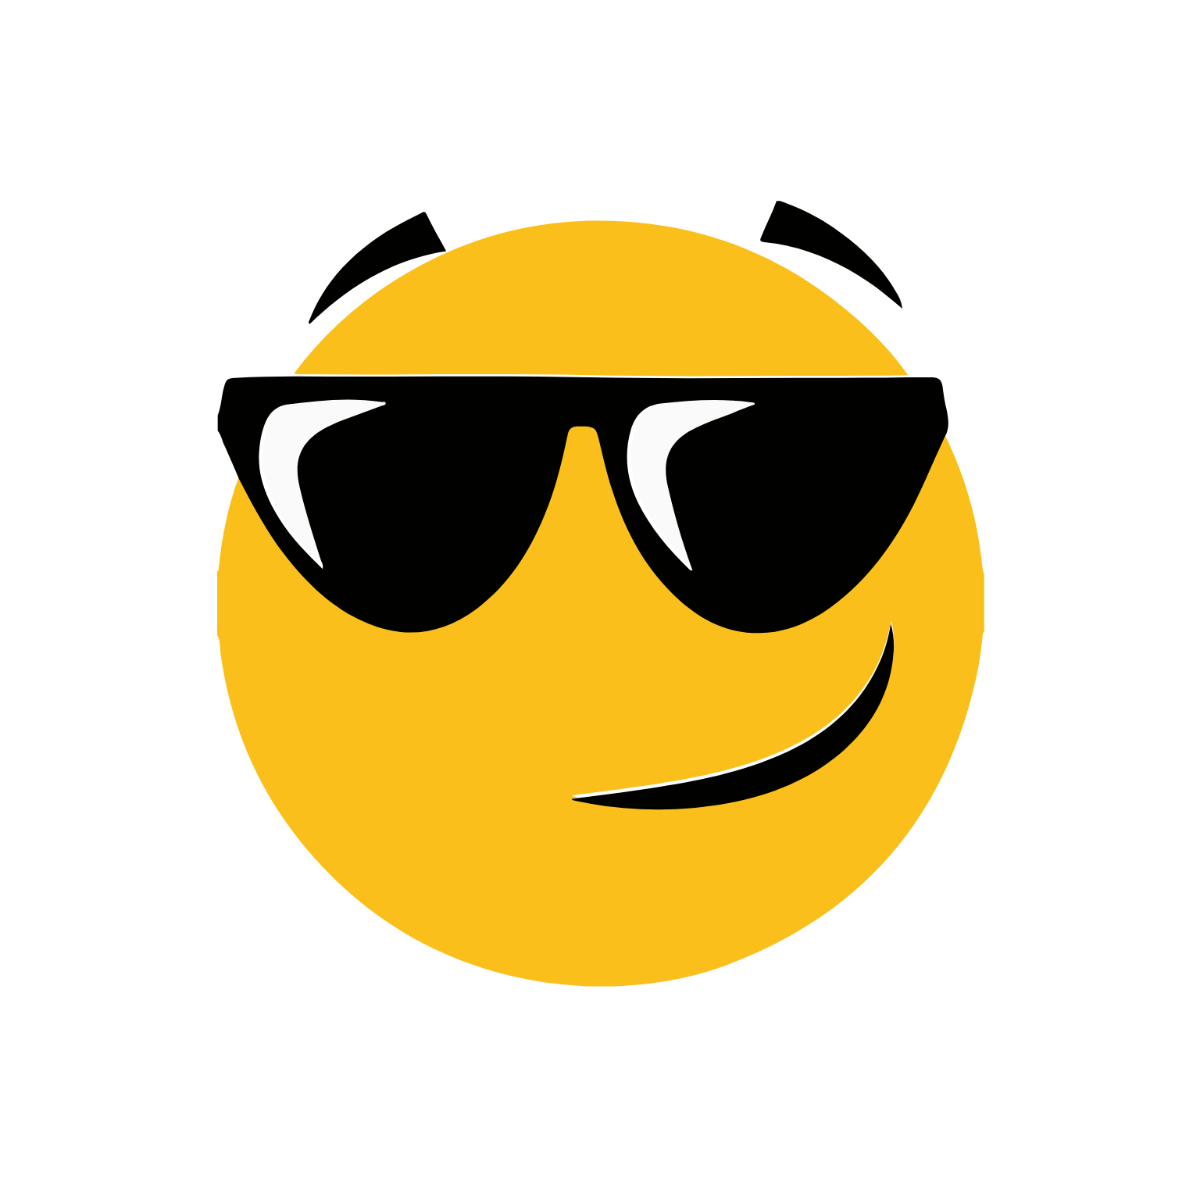 Smiley Face Sunglasses clipart Template